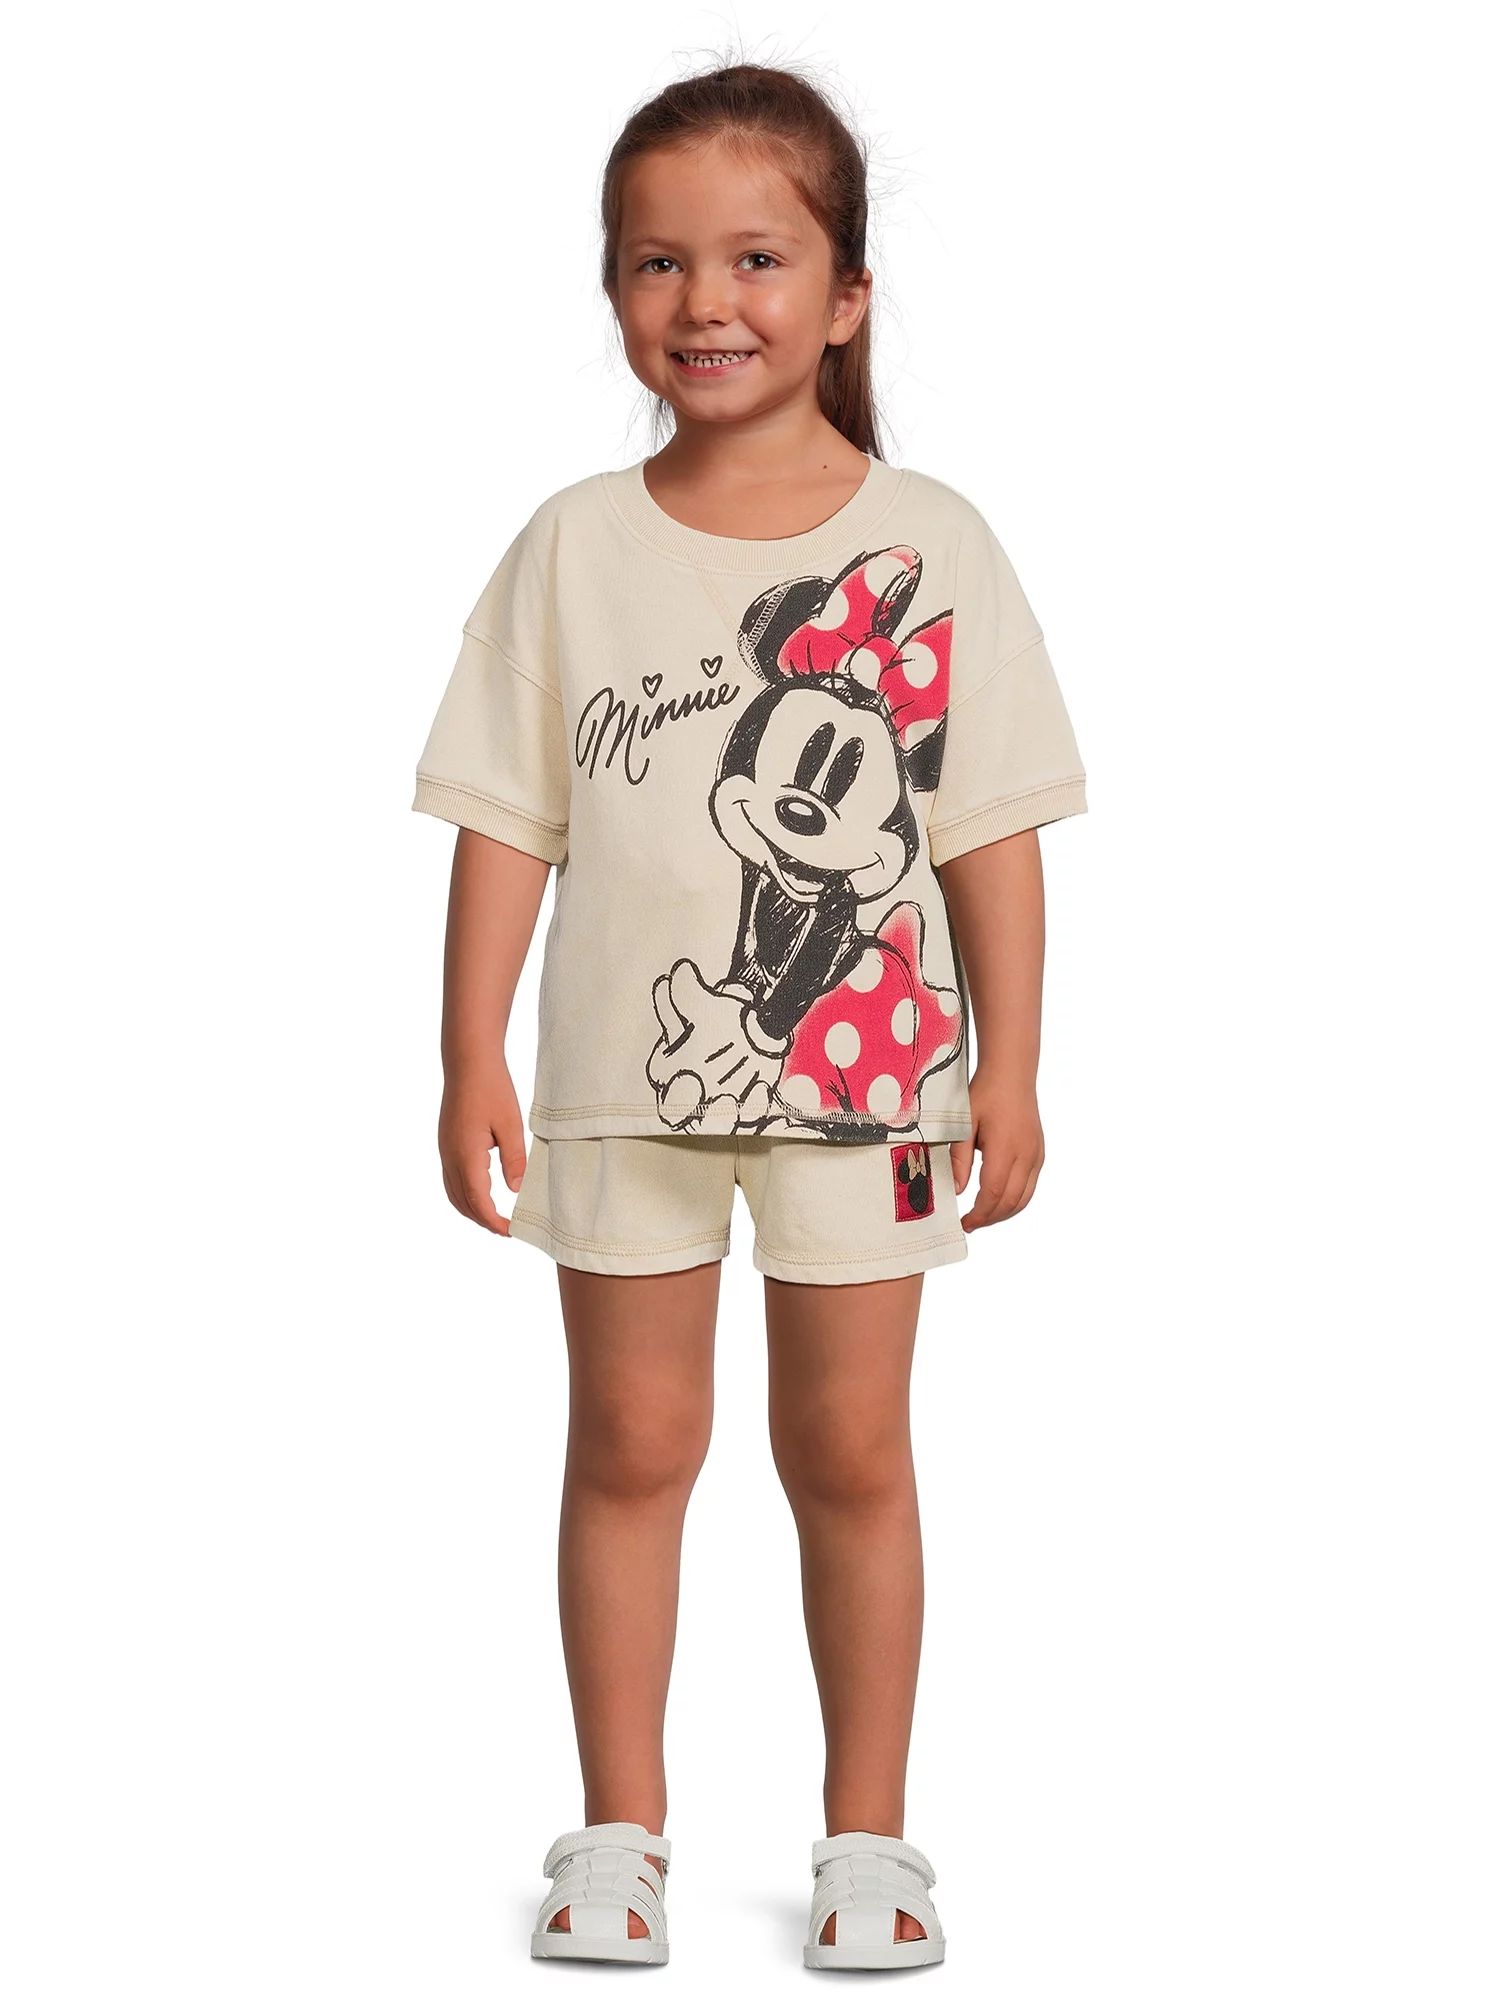 Minnie Mouse Toddler Girls Tee and Shorts Set, 2-Piece, Sizes 12M-5T | Walmart (US)